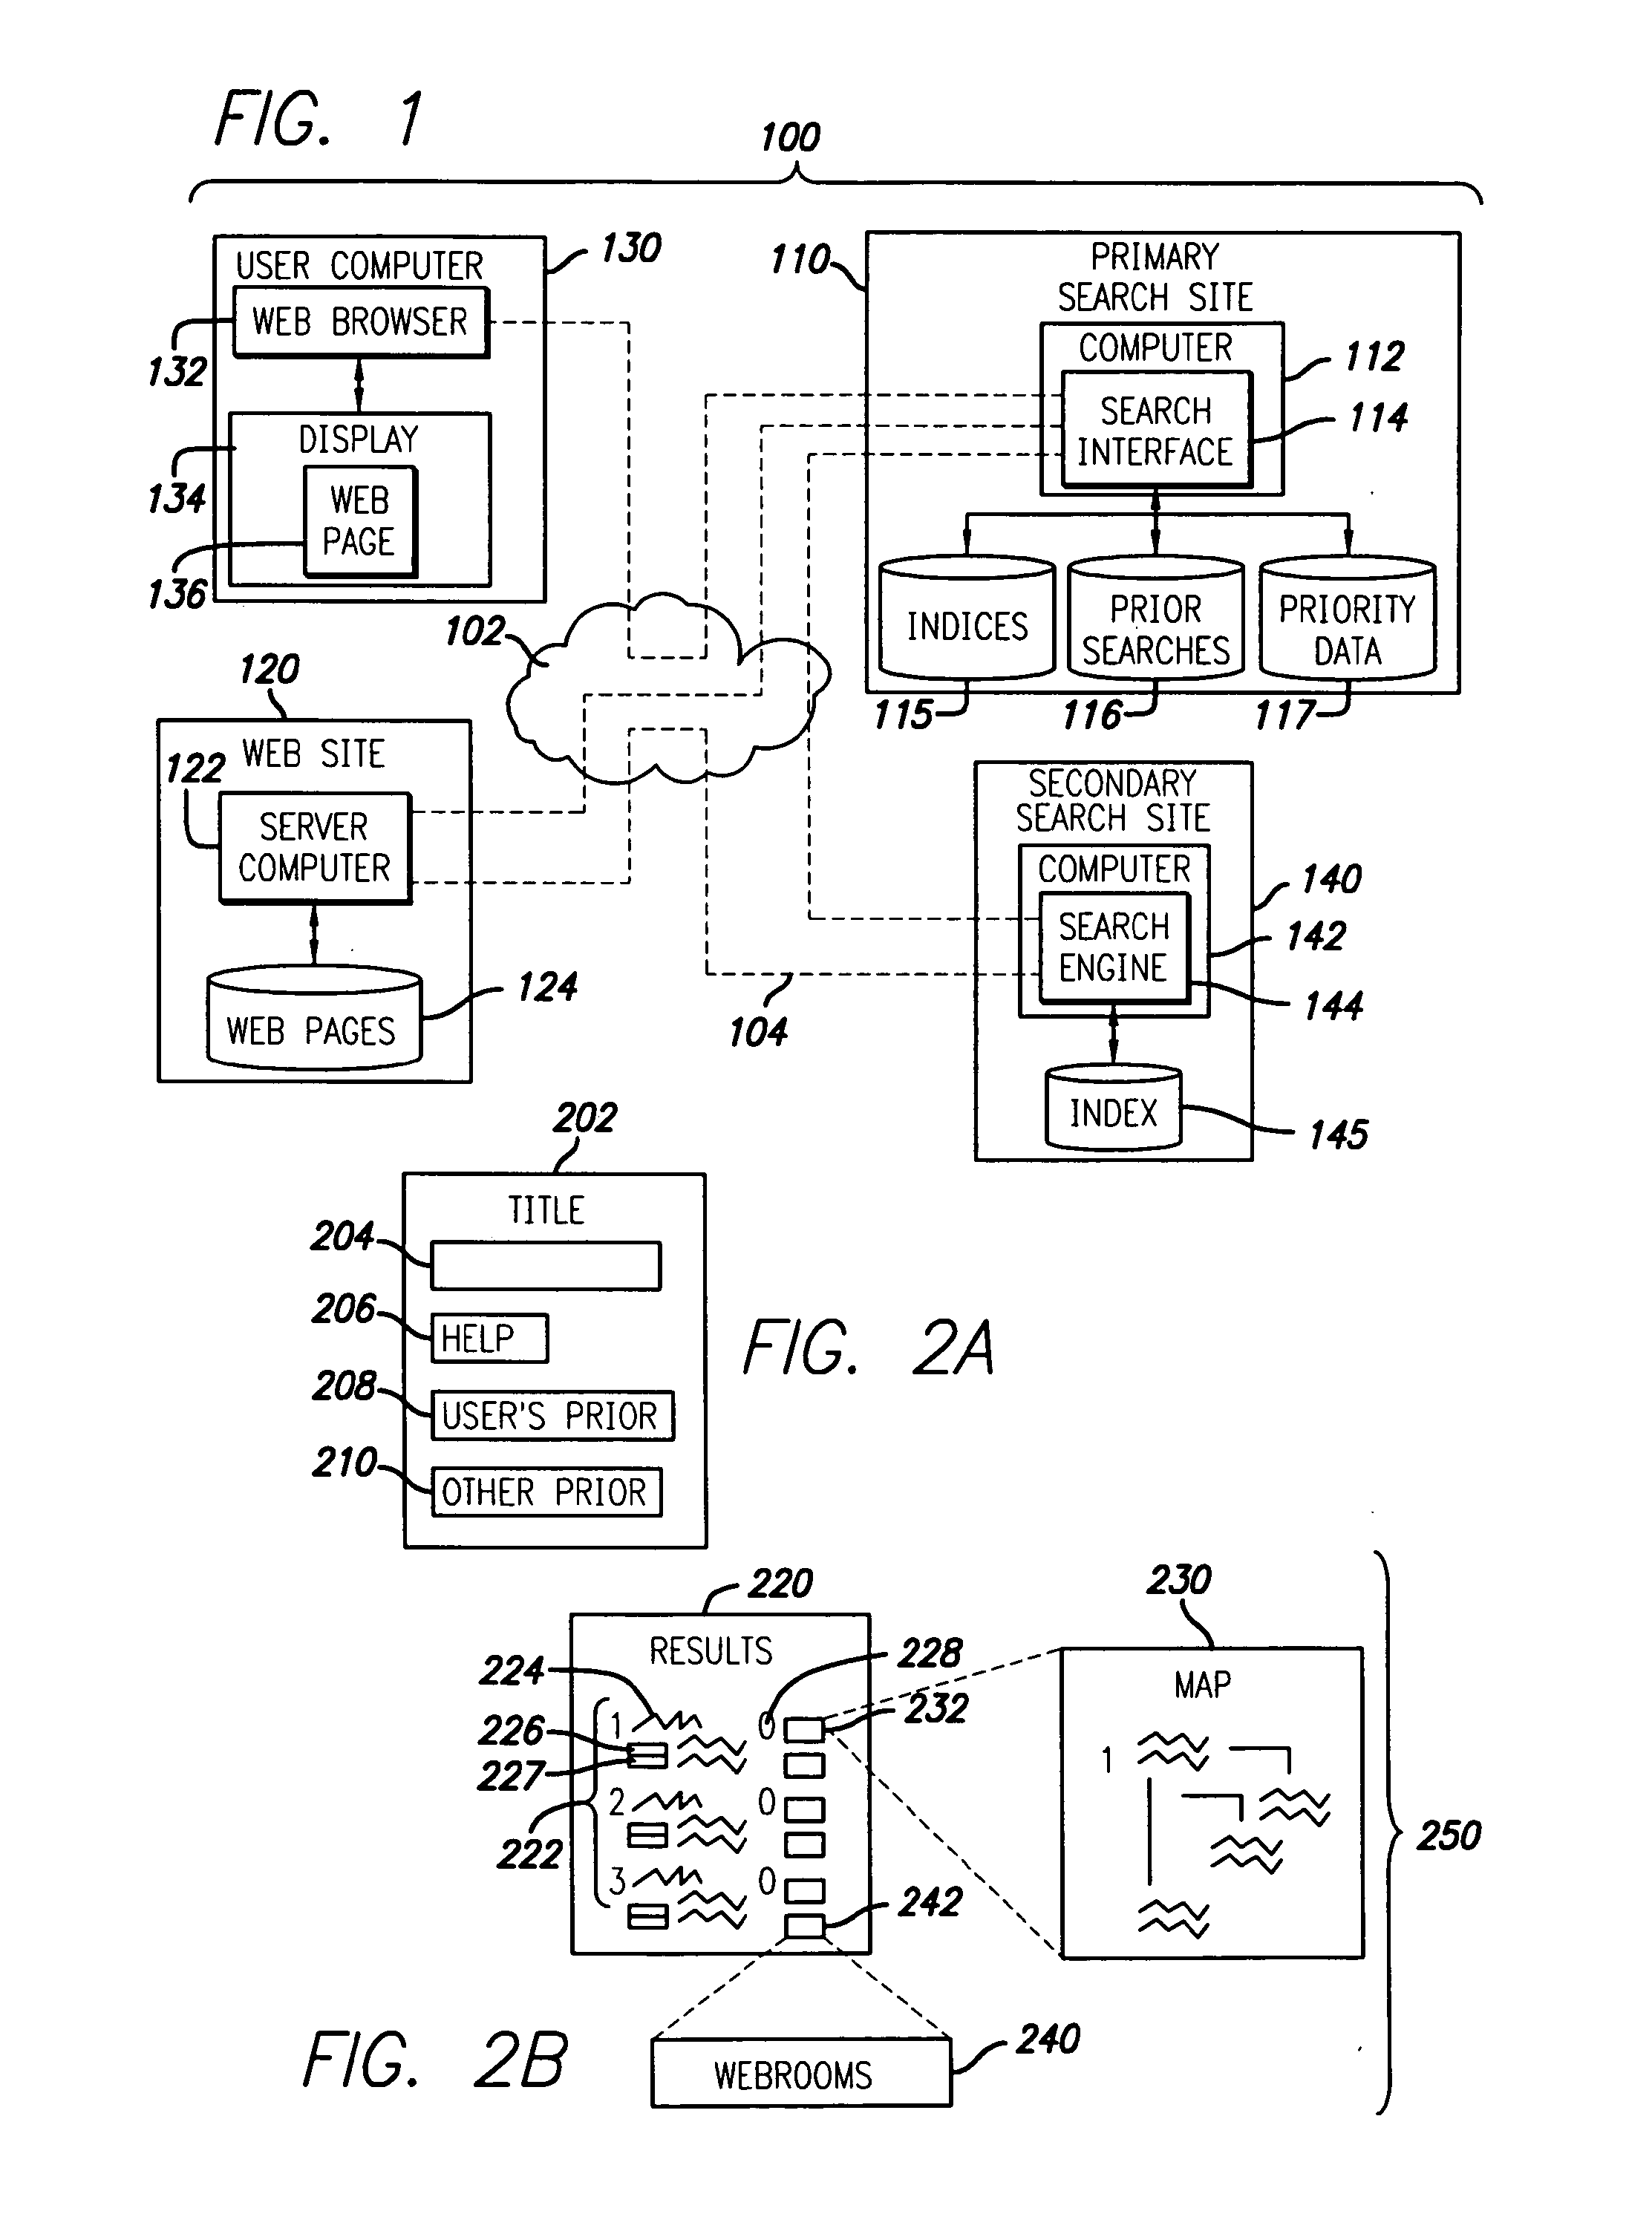 Method and system for searching a wide area network